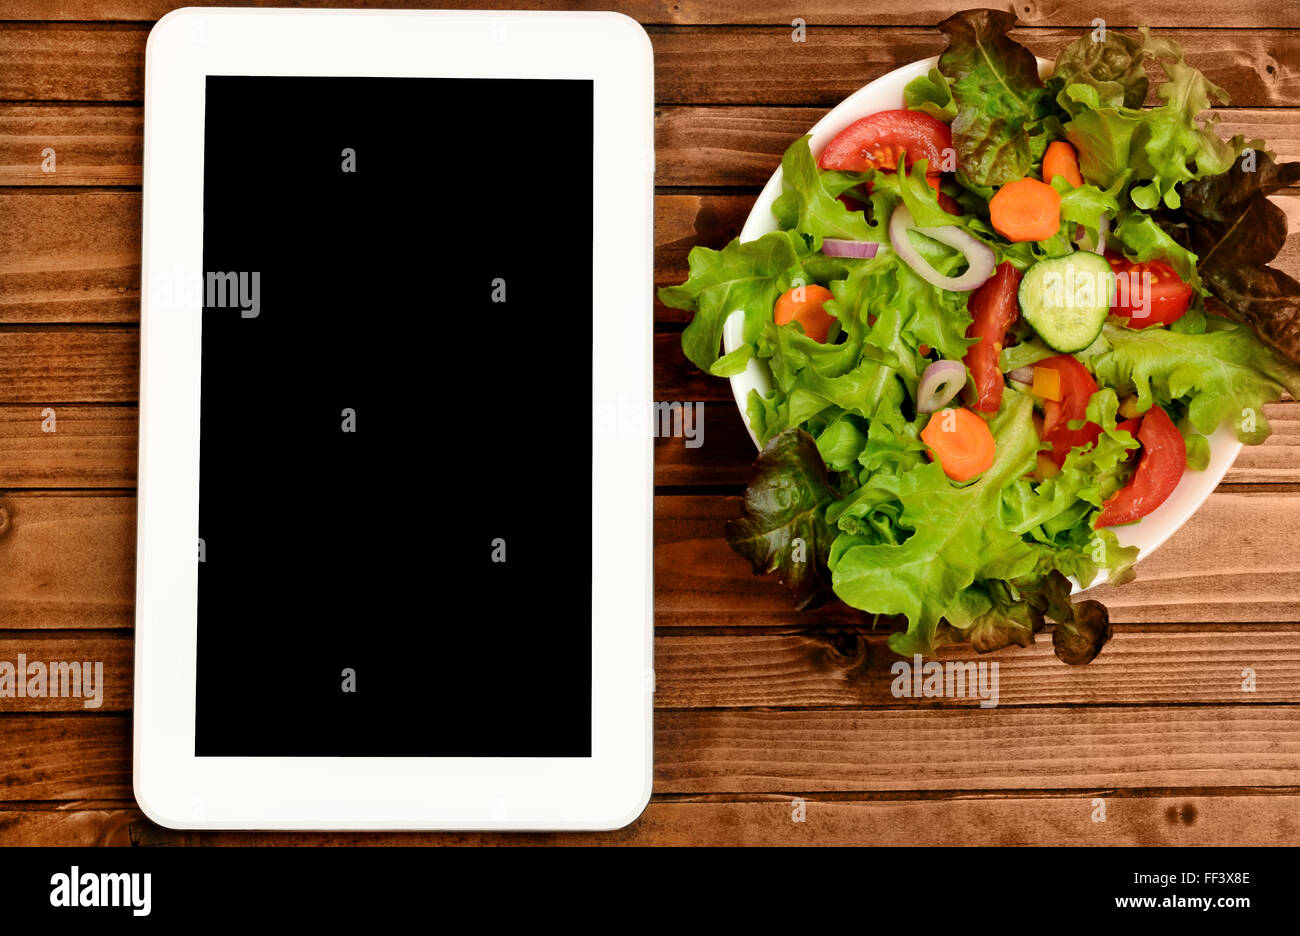 Tablet with vegetable salad on wooden table Stock Photo